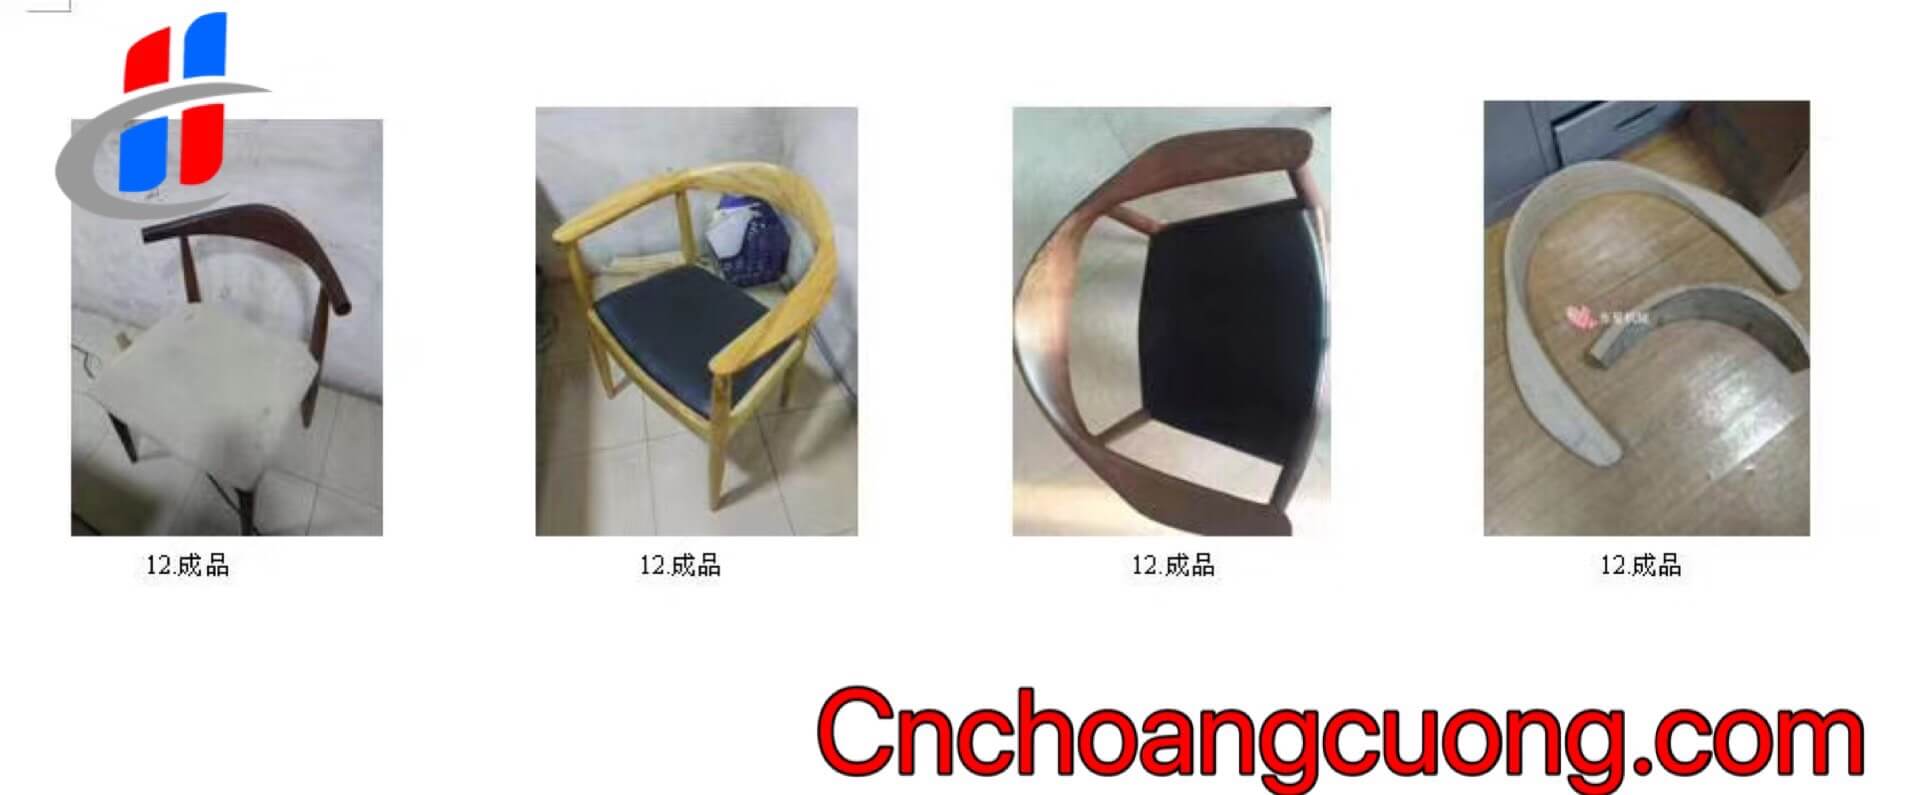 https://cnchoangcuong.com/?post_type=product&p=2953&preview=true